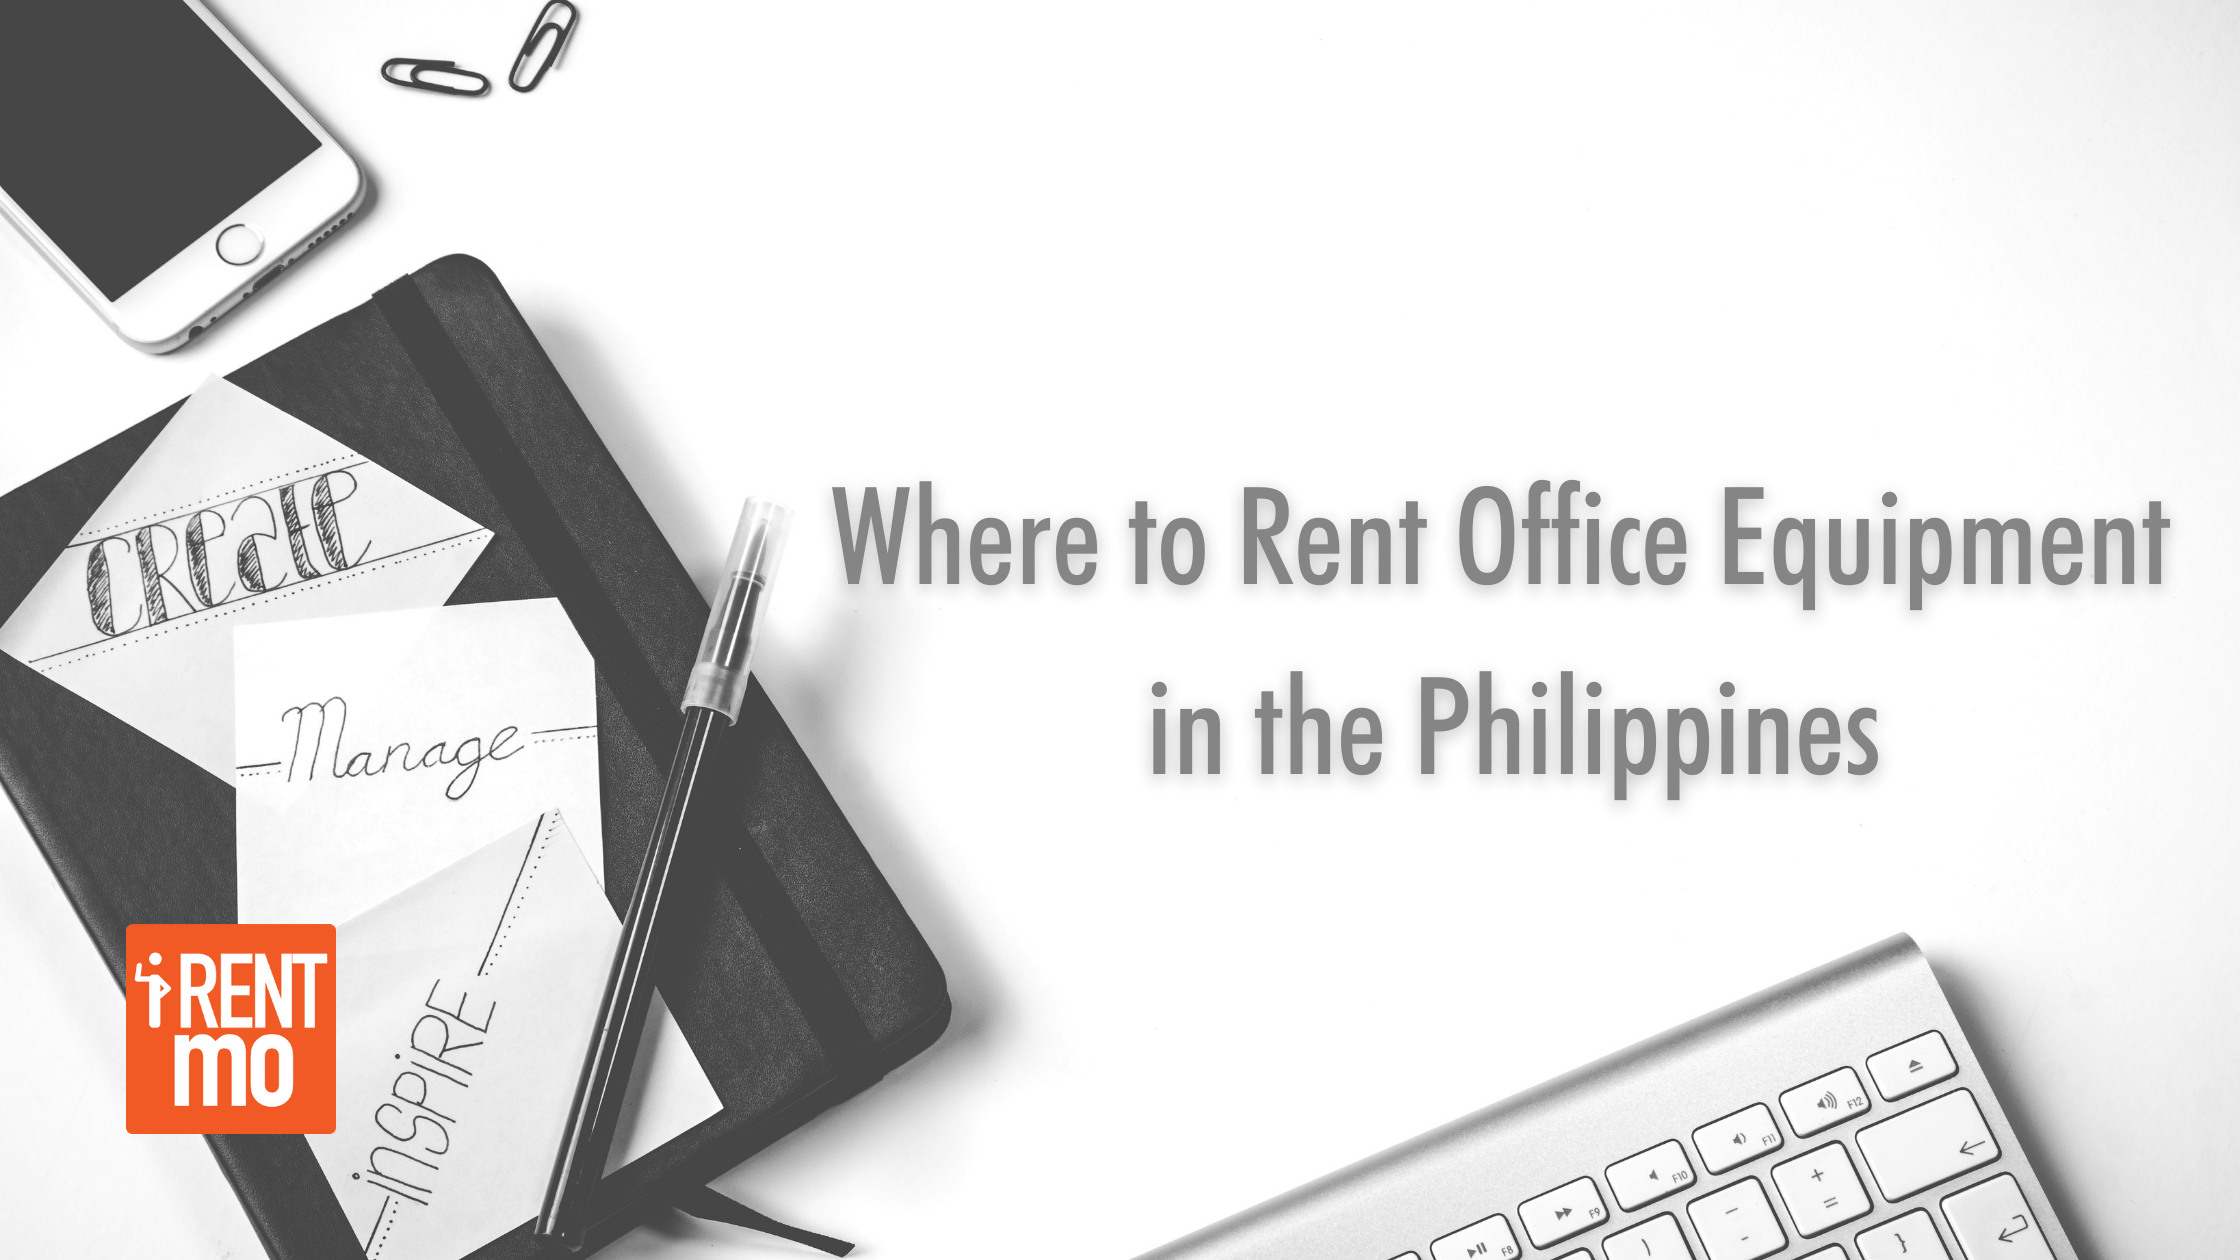 Where to Rent Office Equipment in the Philippines